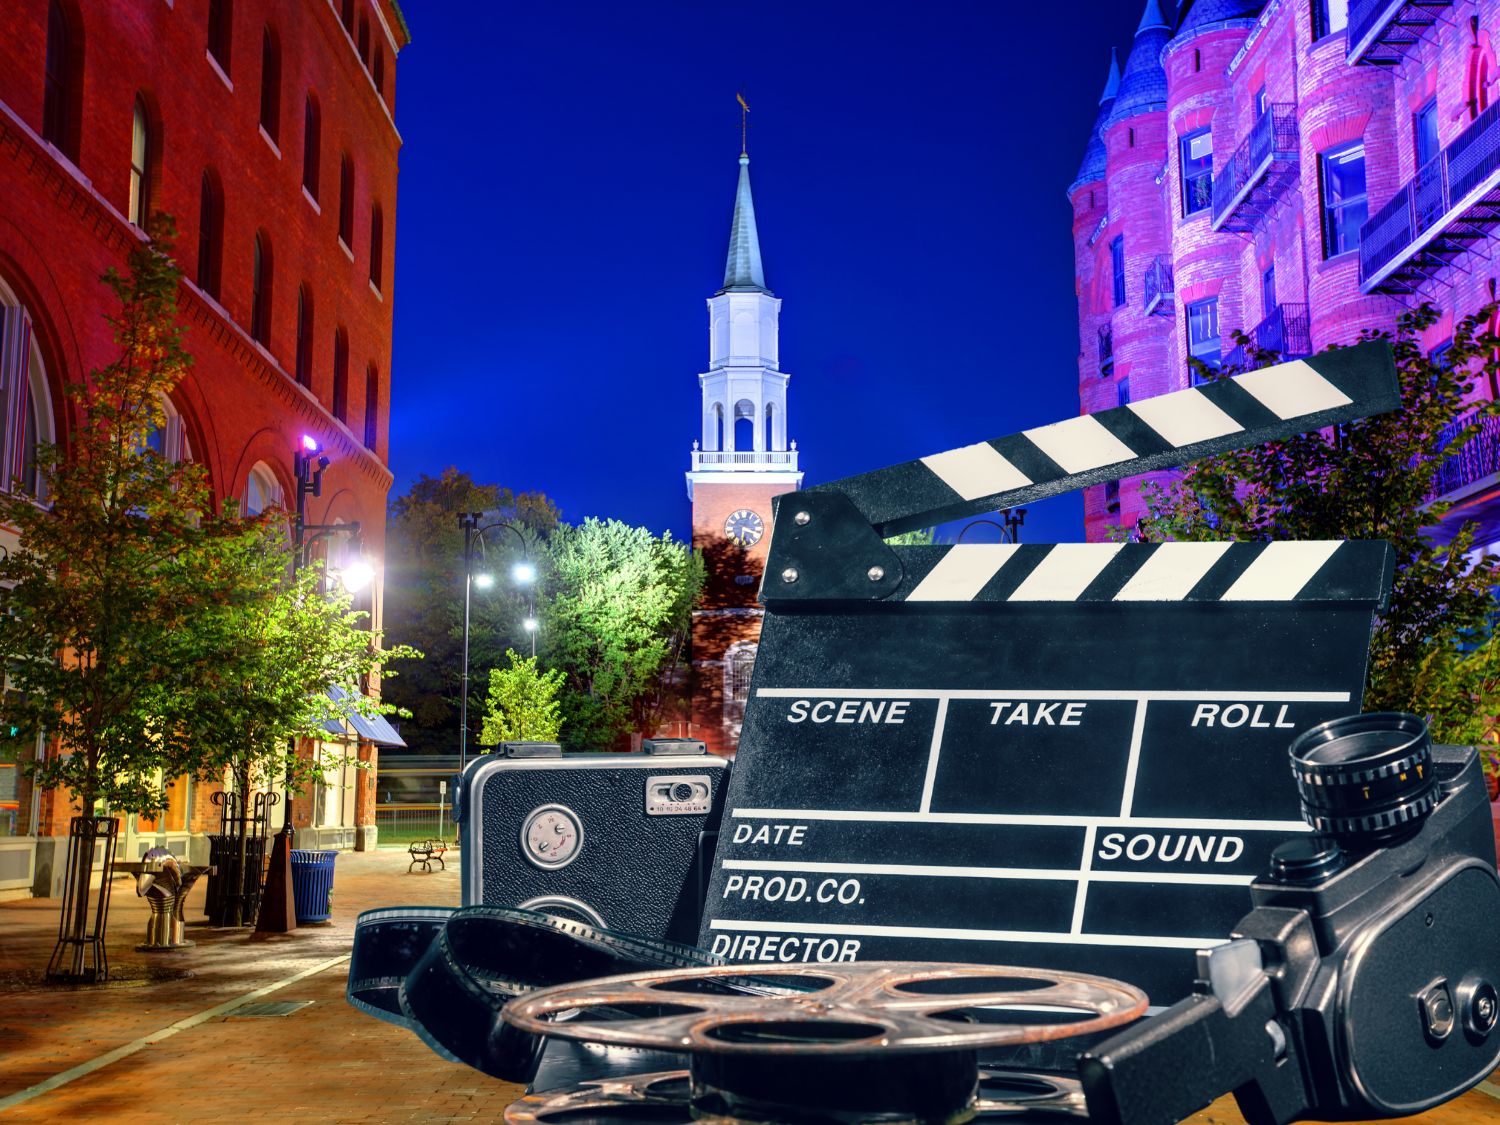 12 Extraordinary Movies Set In Vermont That Will Inspire You To Visit!